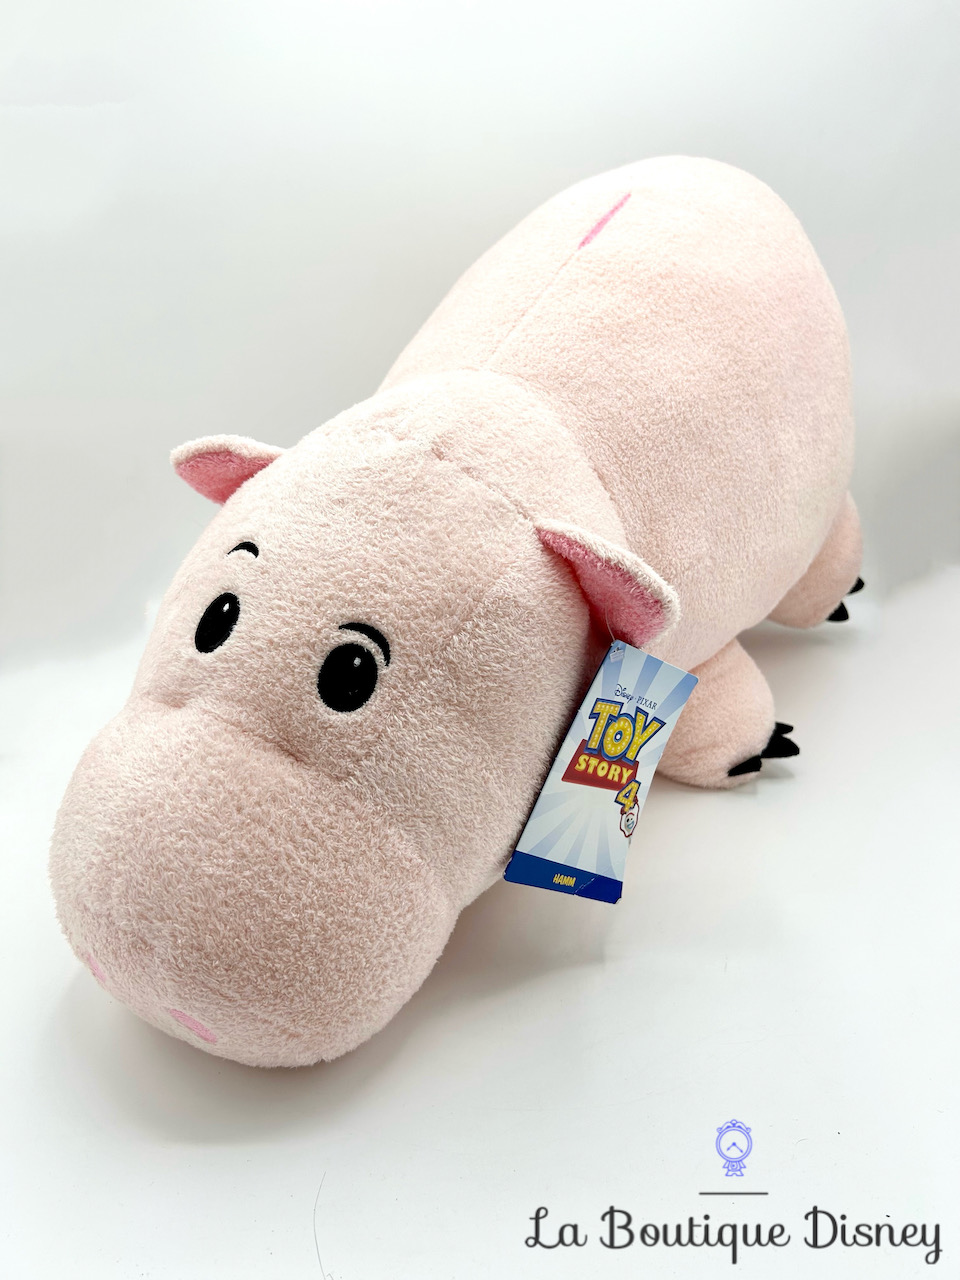 peluche-bayonne-xxl-cochon-rose-toy-story-disney-store-grand-format-grande-taille-2